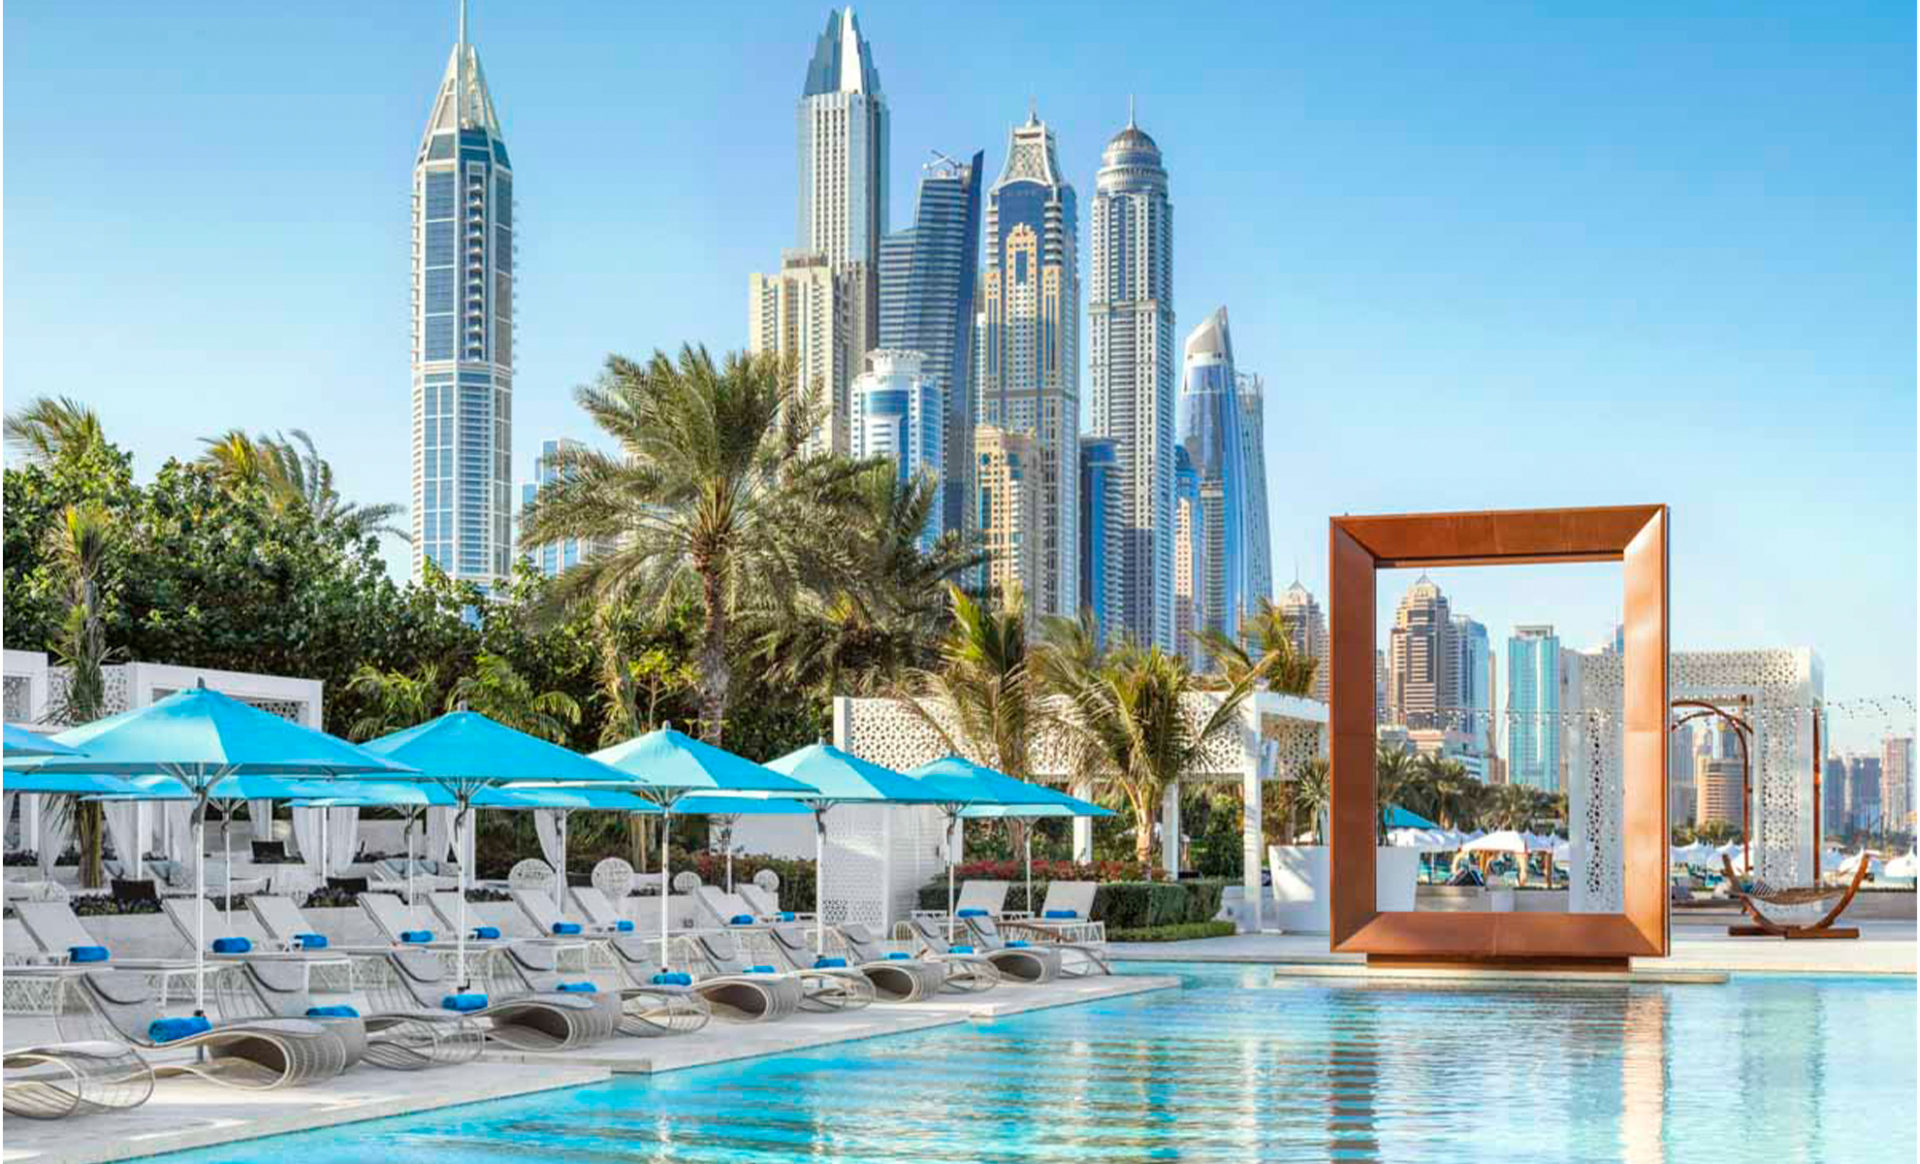 Arabian-Court-one-and-only-pool-Dubai-2